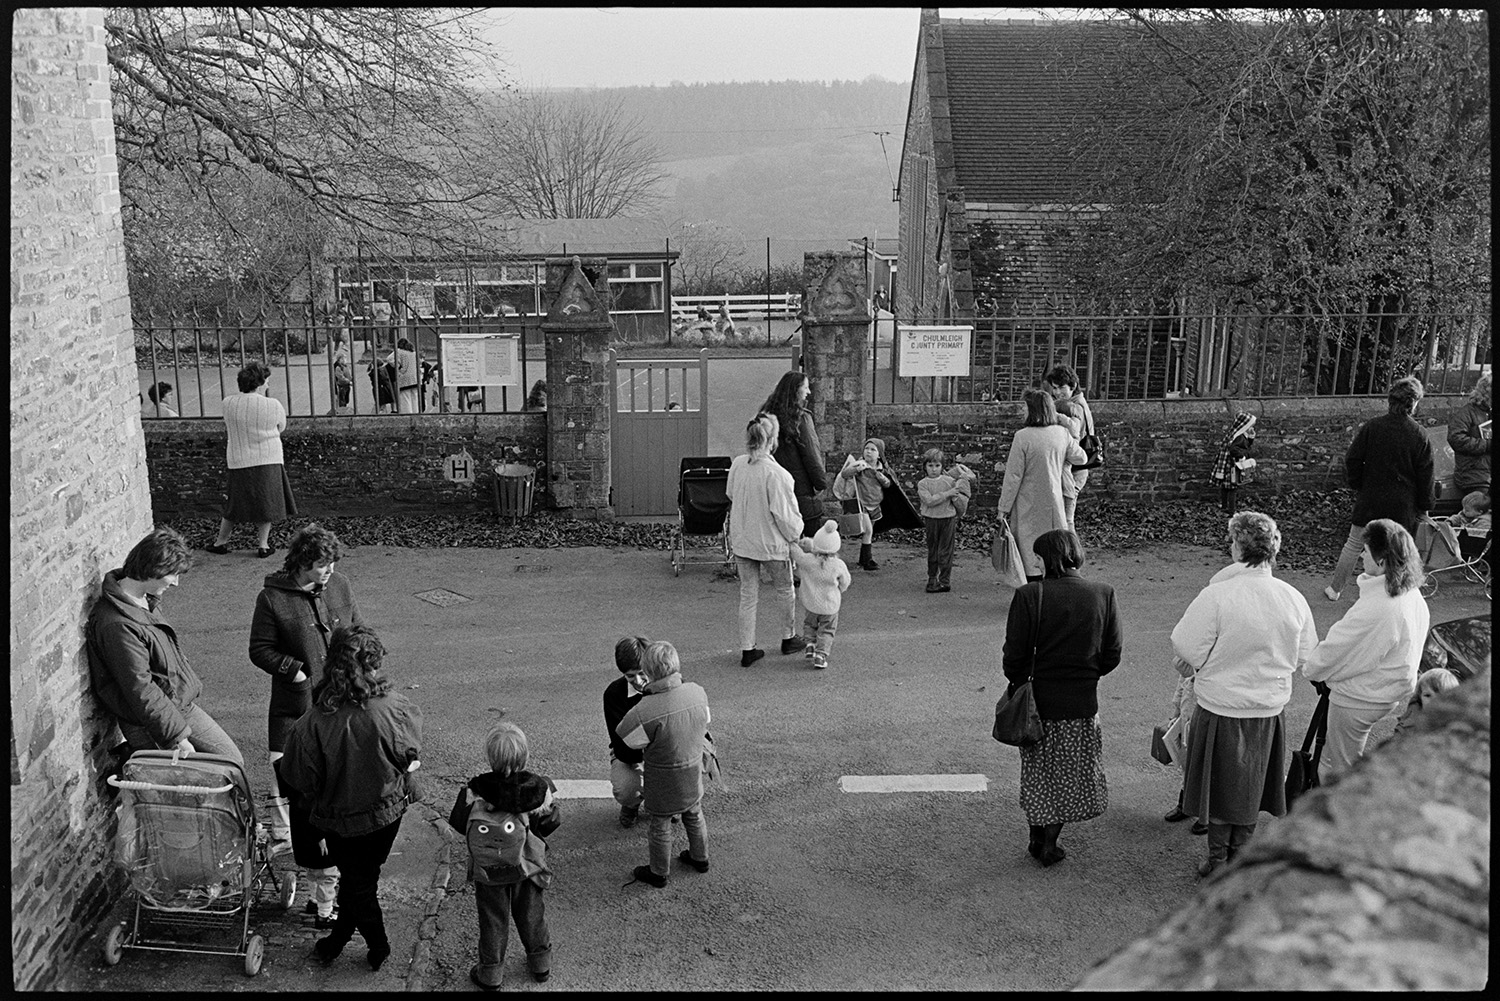 Women, mothers waiting for their children outside school.
[Mothers waiting for their children at the gates of the old Chulmleigh Primary School. Women and children are standing in the street, with the school playground and school buildings in the background.]